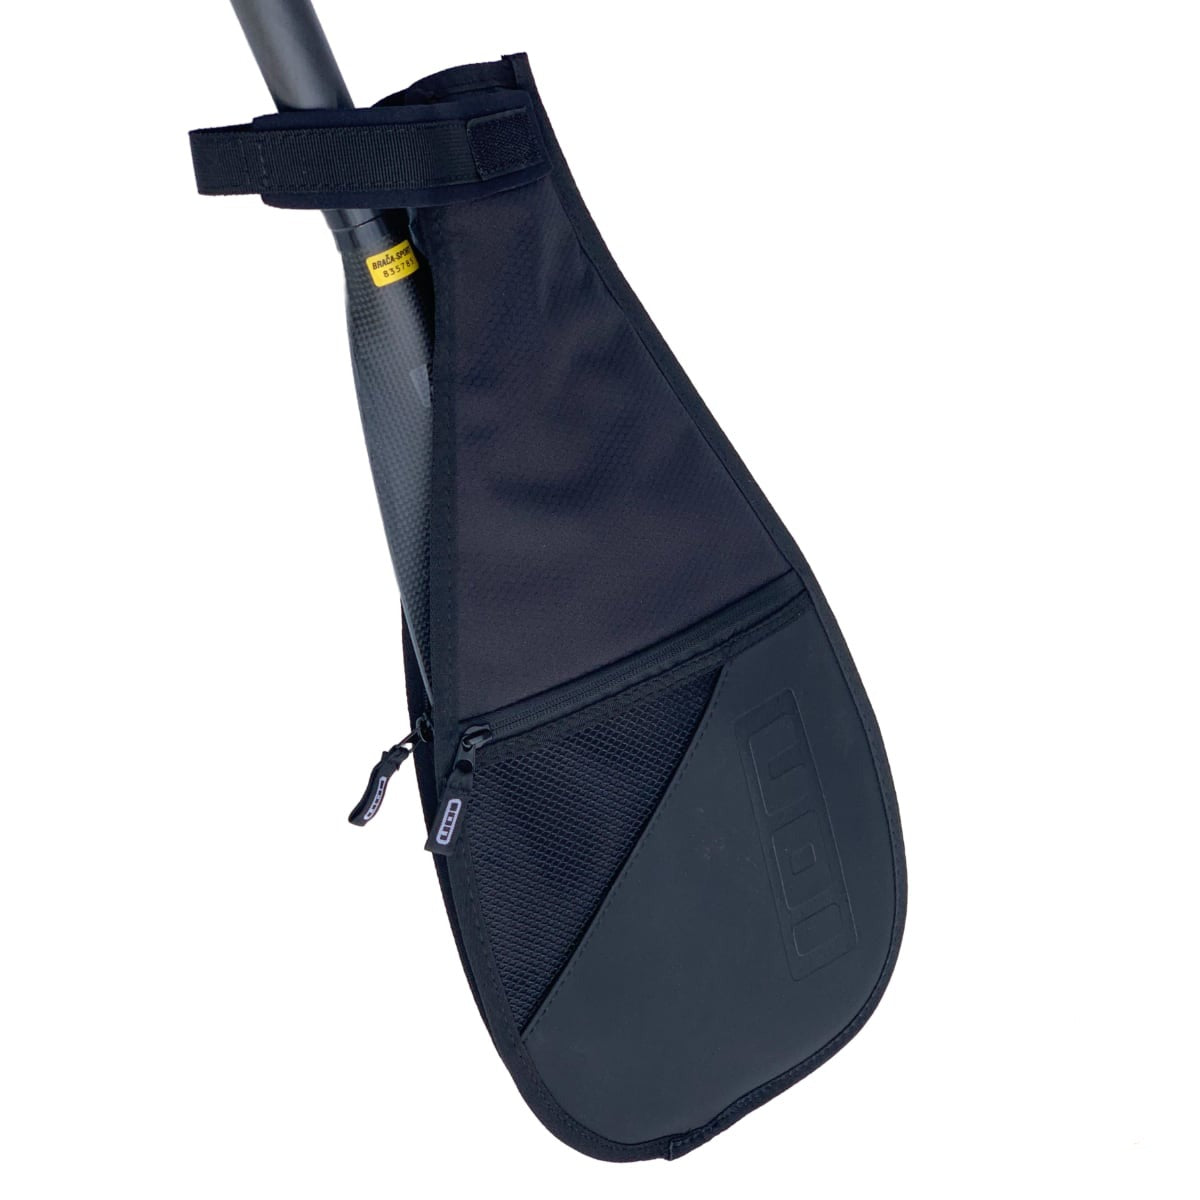 ION SUP Paddle Blade Bag with SUP paddle